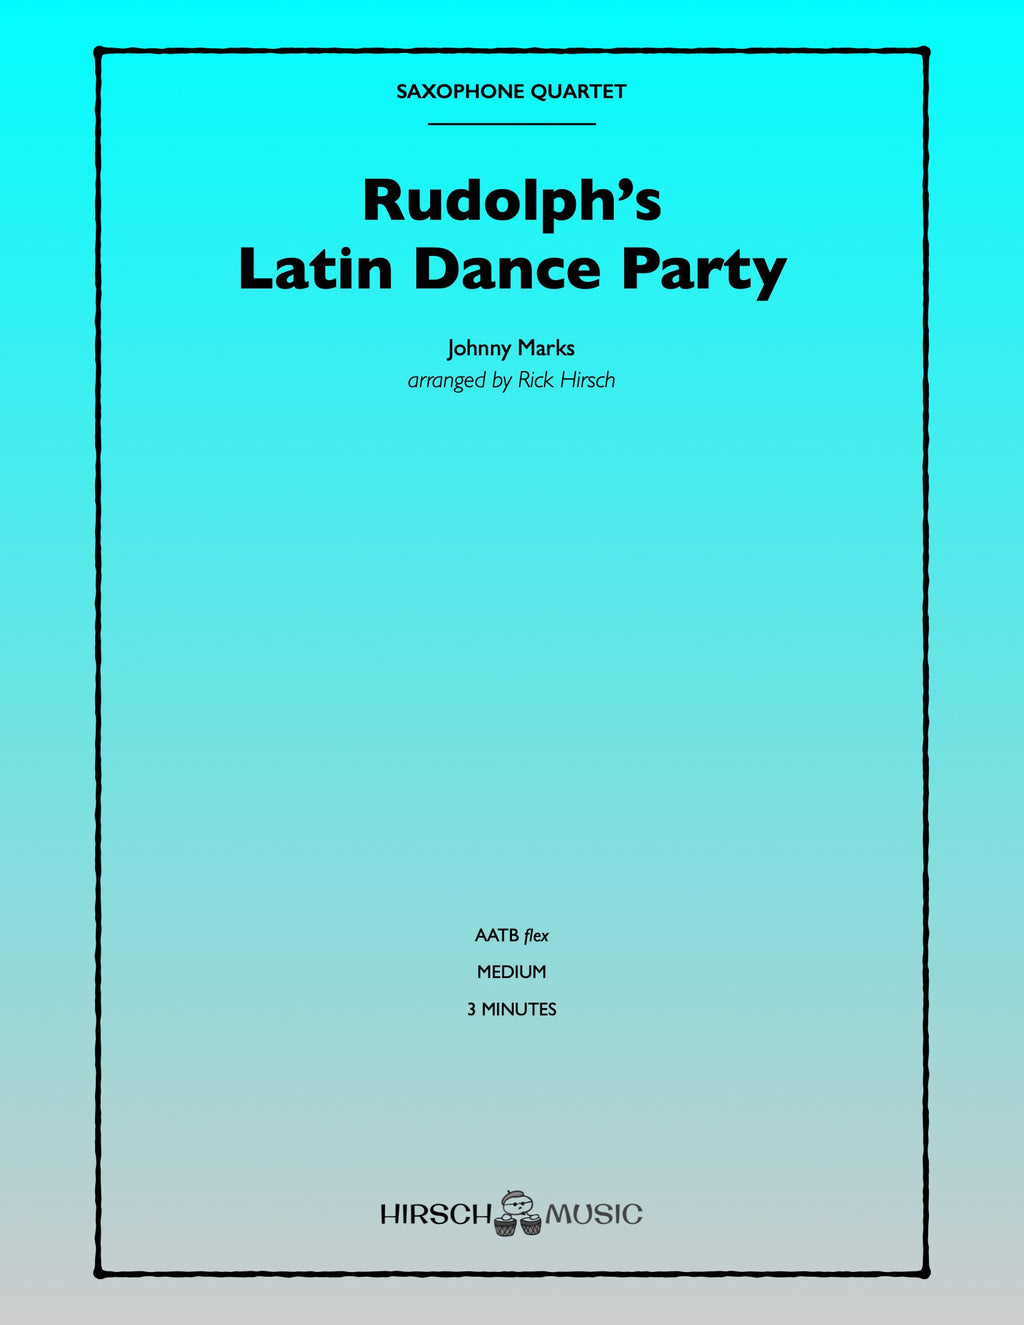 Rudolph's Latin Dance Party